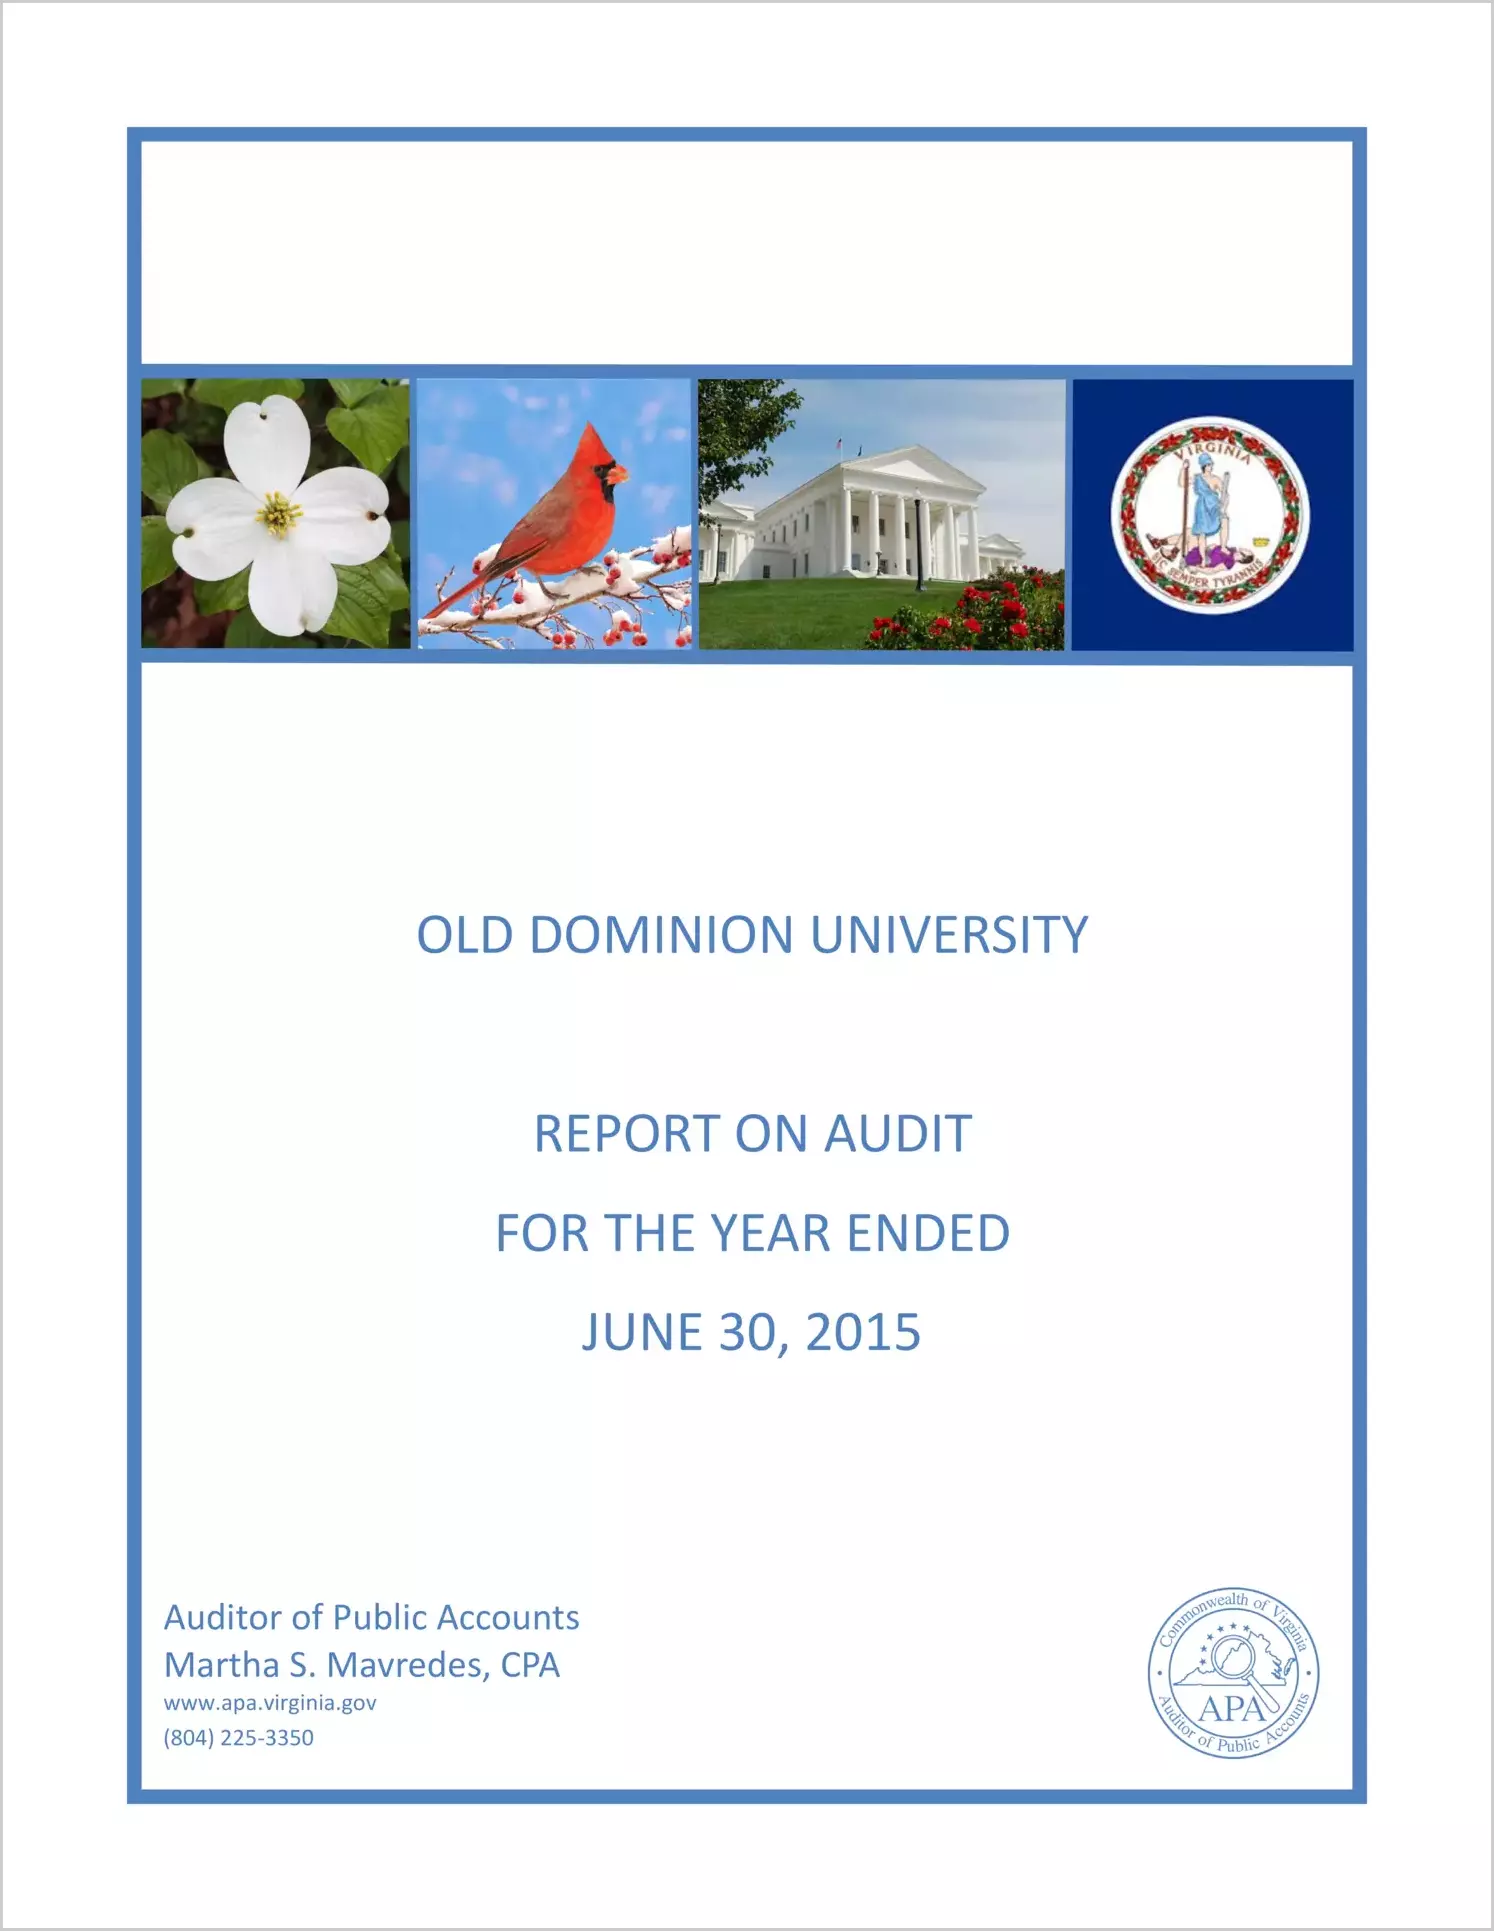 Old Dominion University for the year ended June 30, 2015